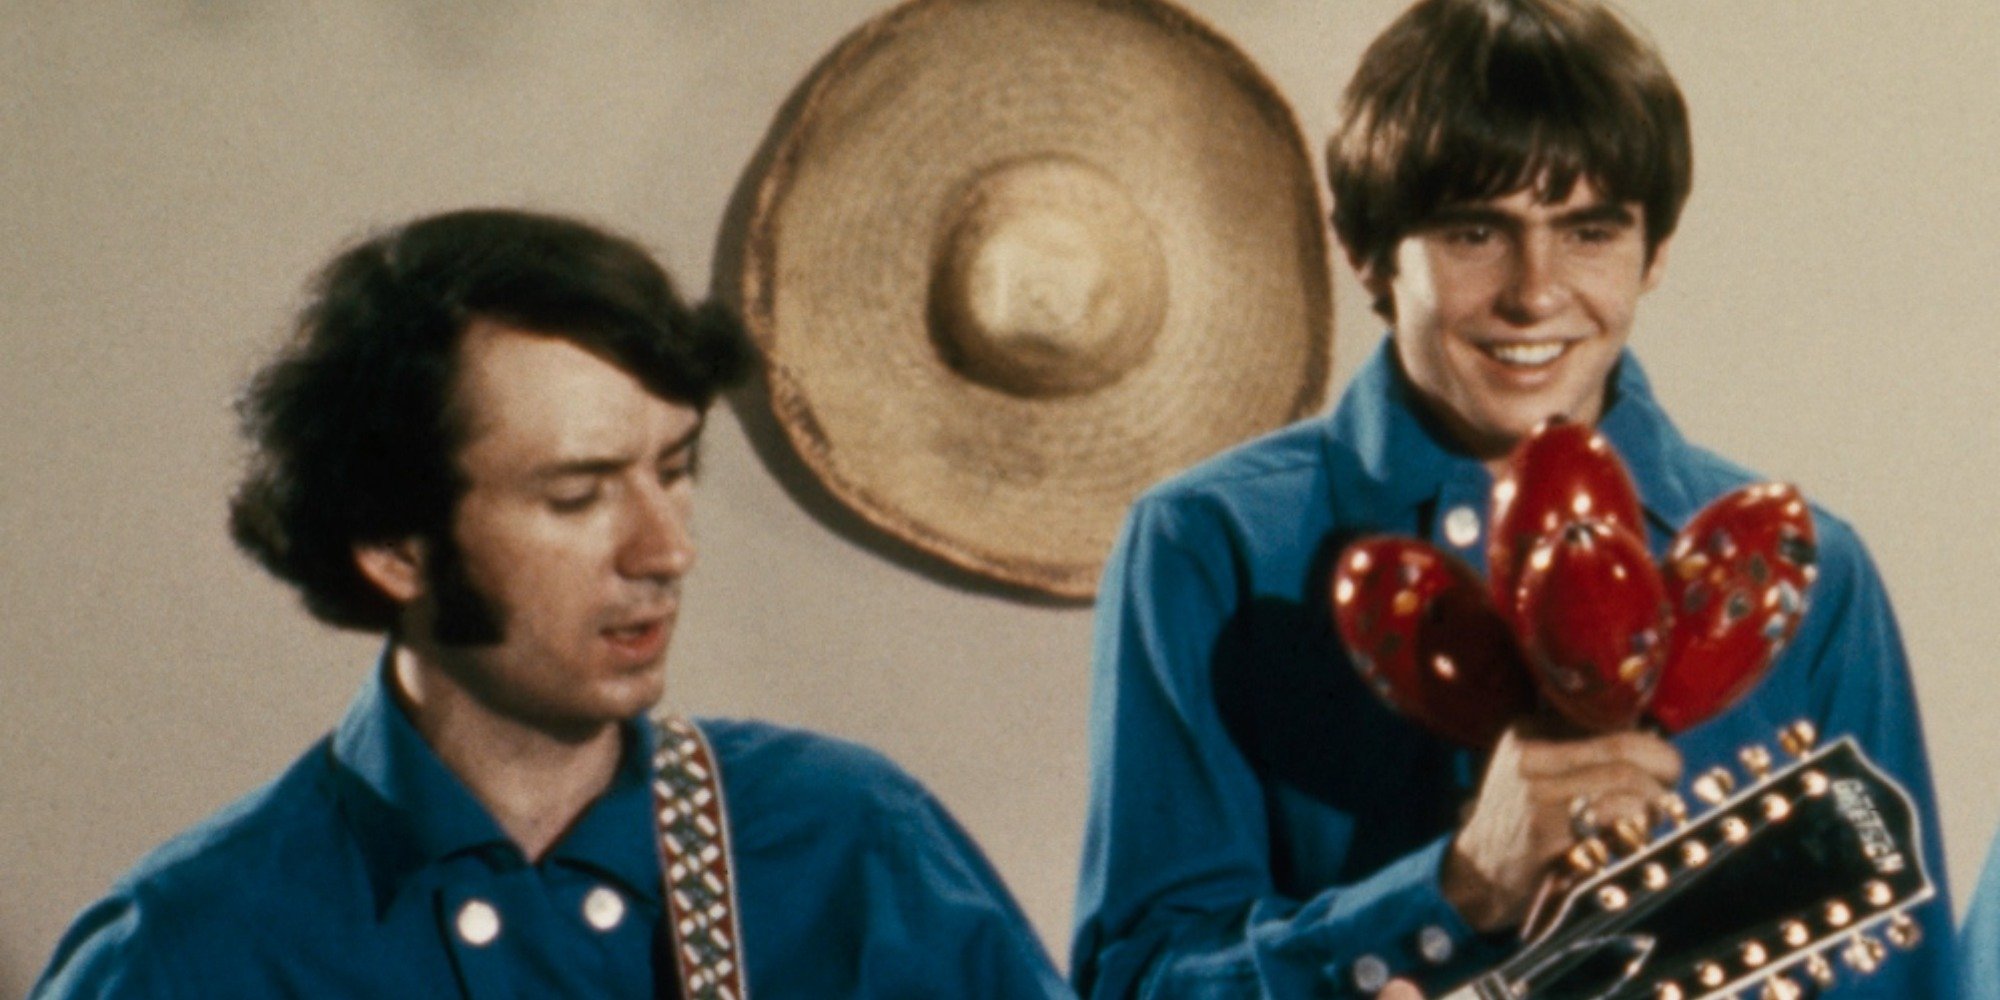 Mike Nesmith and Davy Jones as performers on "The Monkees" television show.